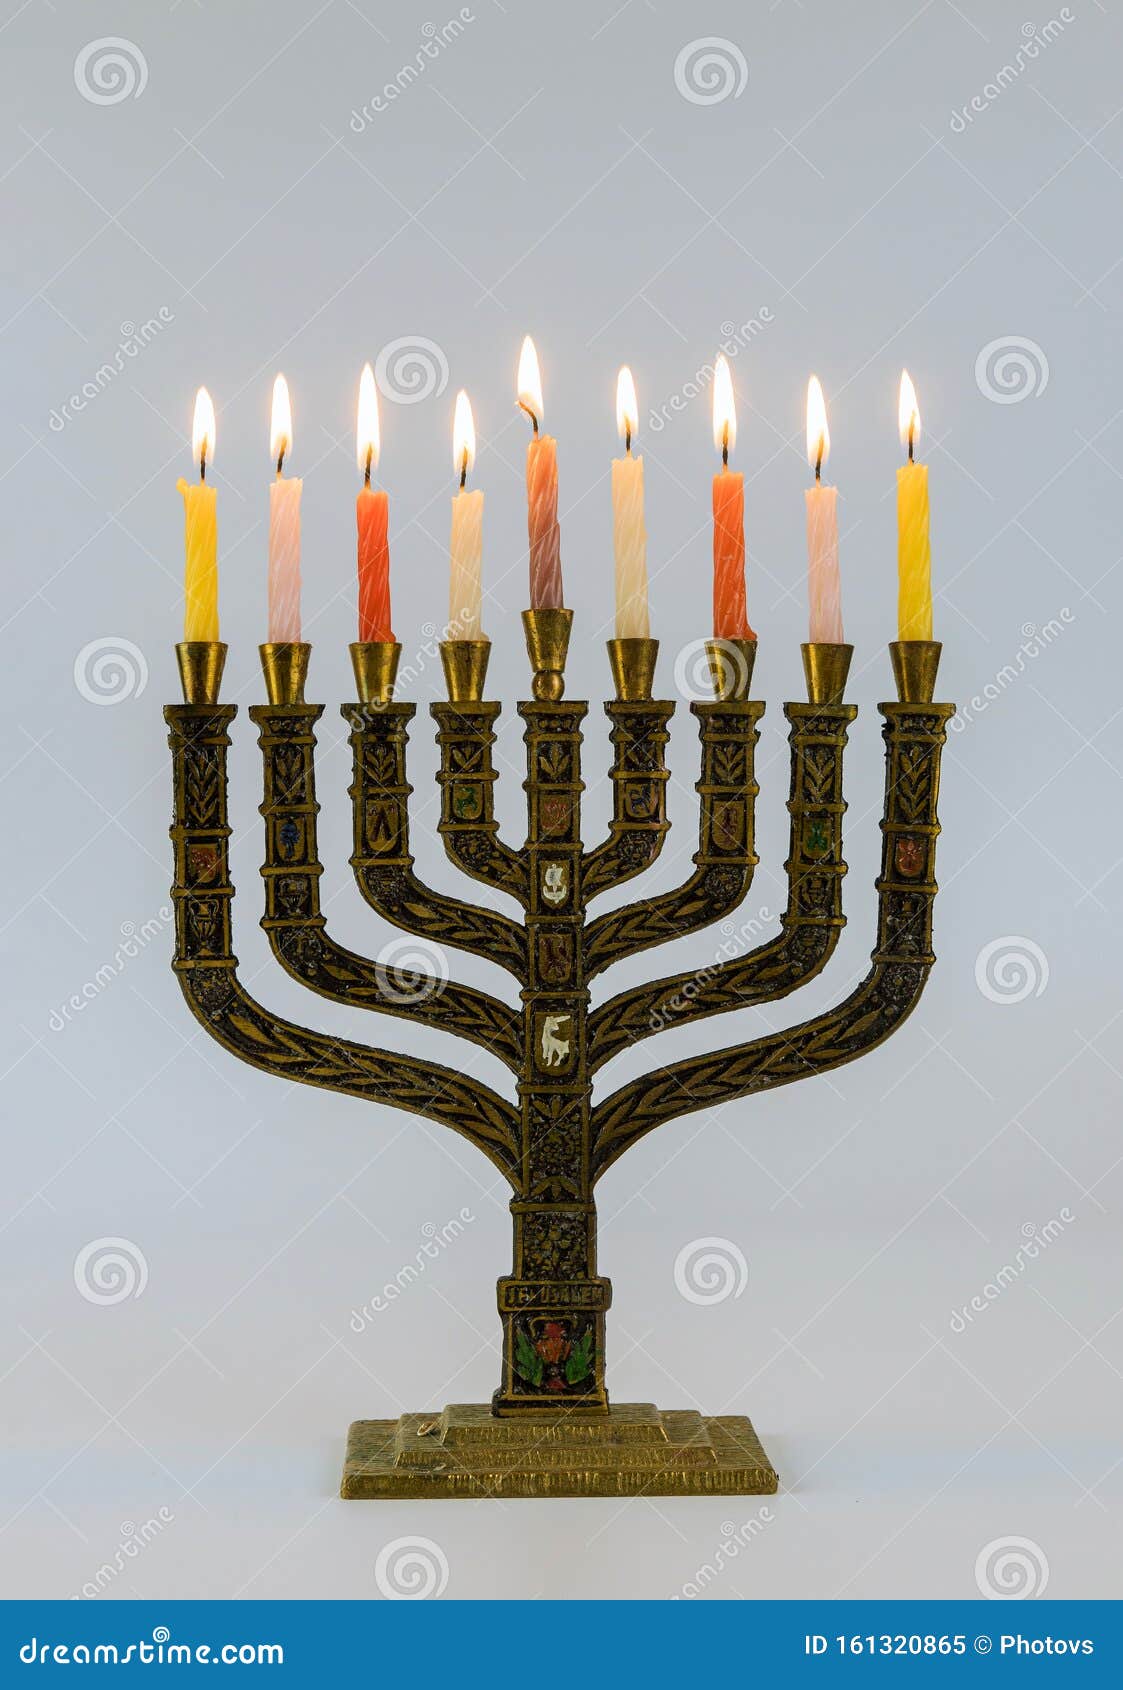 a ic candle lighting for the jewish holiday of hanukkah menorah with lit candles in celebration of chanukah